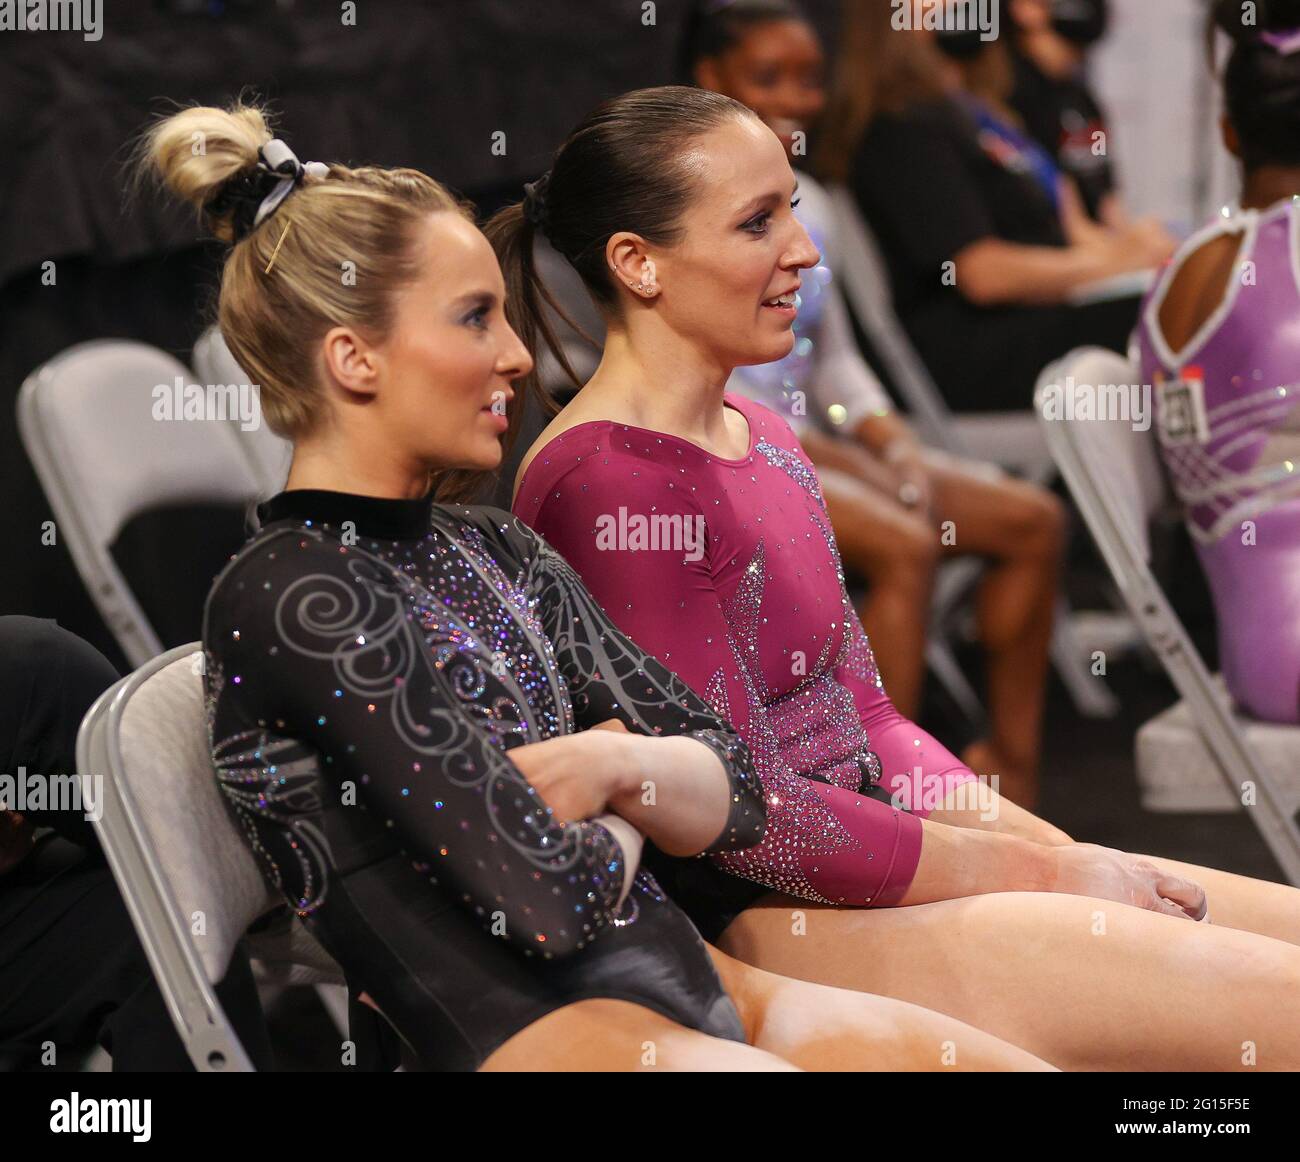 Texas, USA. 04th June, 2021. June 4, 2021: MyKayla Skinner and Chellsie Memmel watch others perform their bar routines during Session 1 of the 2021 U.S. Gymnastics Championships at Dickies Arena in Fort Worth, TX. Kyle Okita/CSM Credit: Cal Sport Media/Alamy Live News Stock Photo